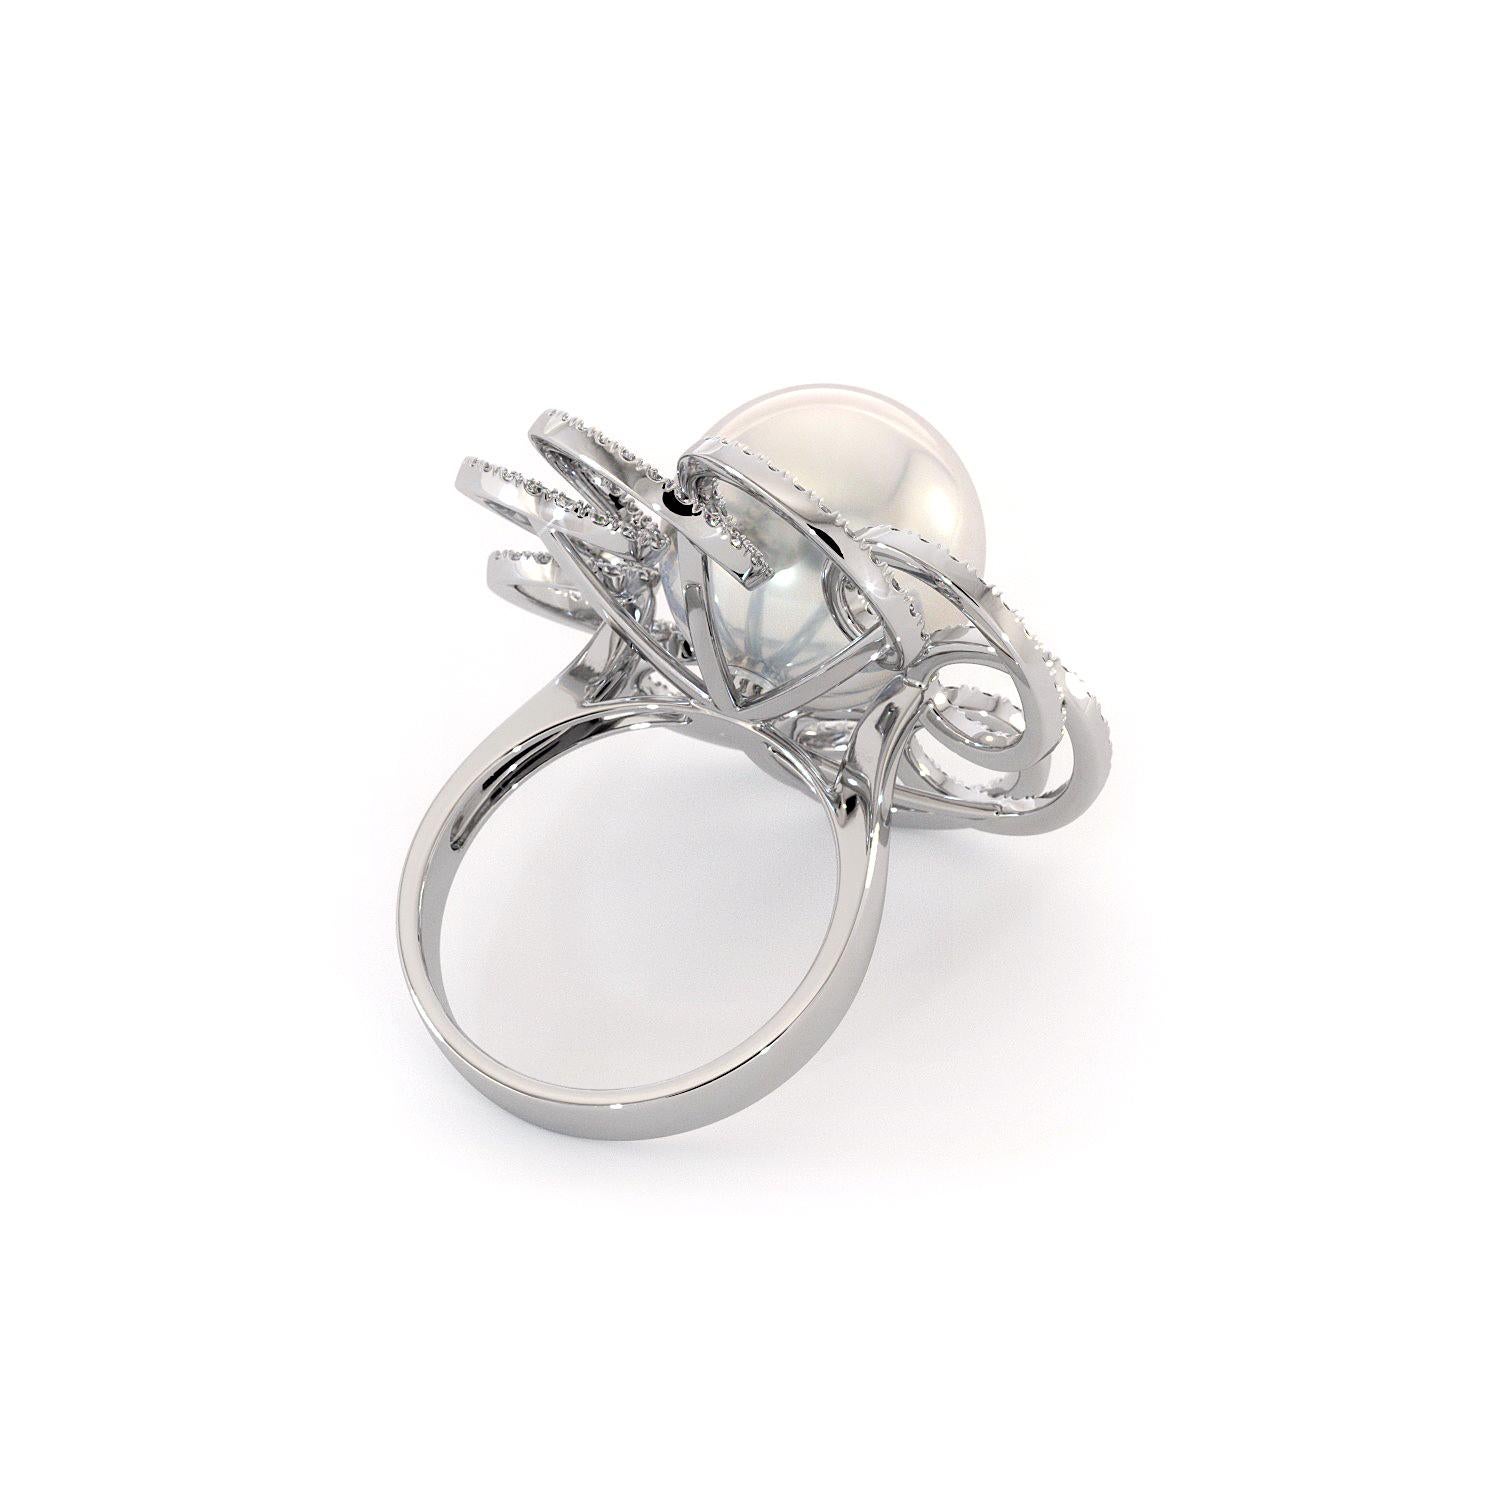 For Sale:  18K White Gold White South Sea Pearl Diamonds Ring by Emilia Lekarrier Certified 4